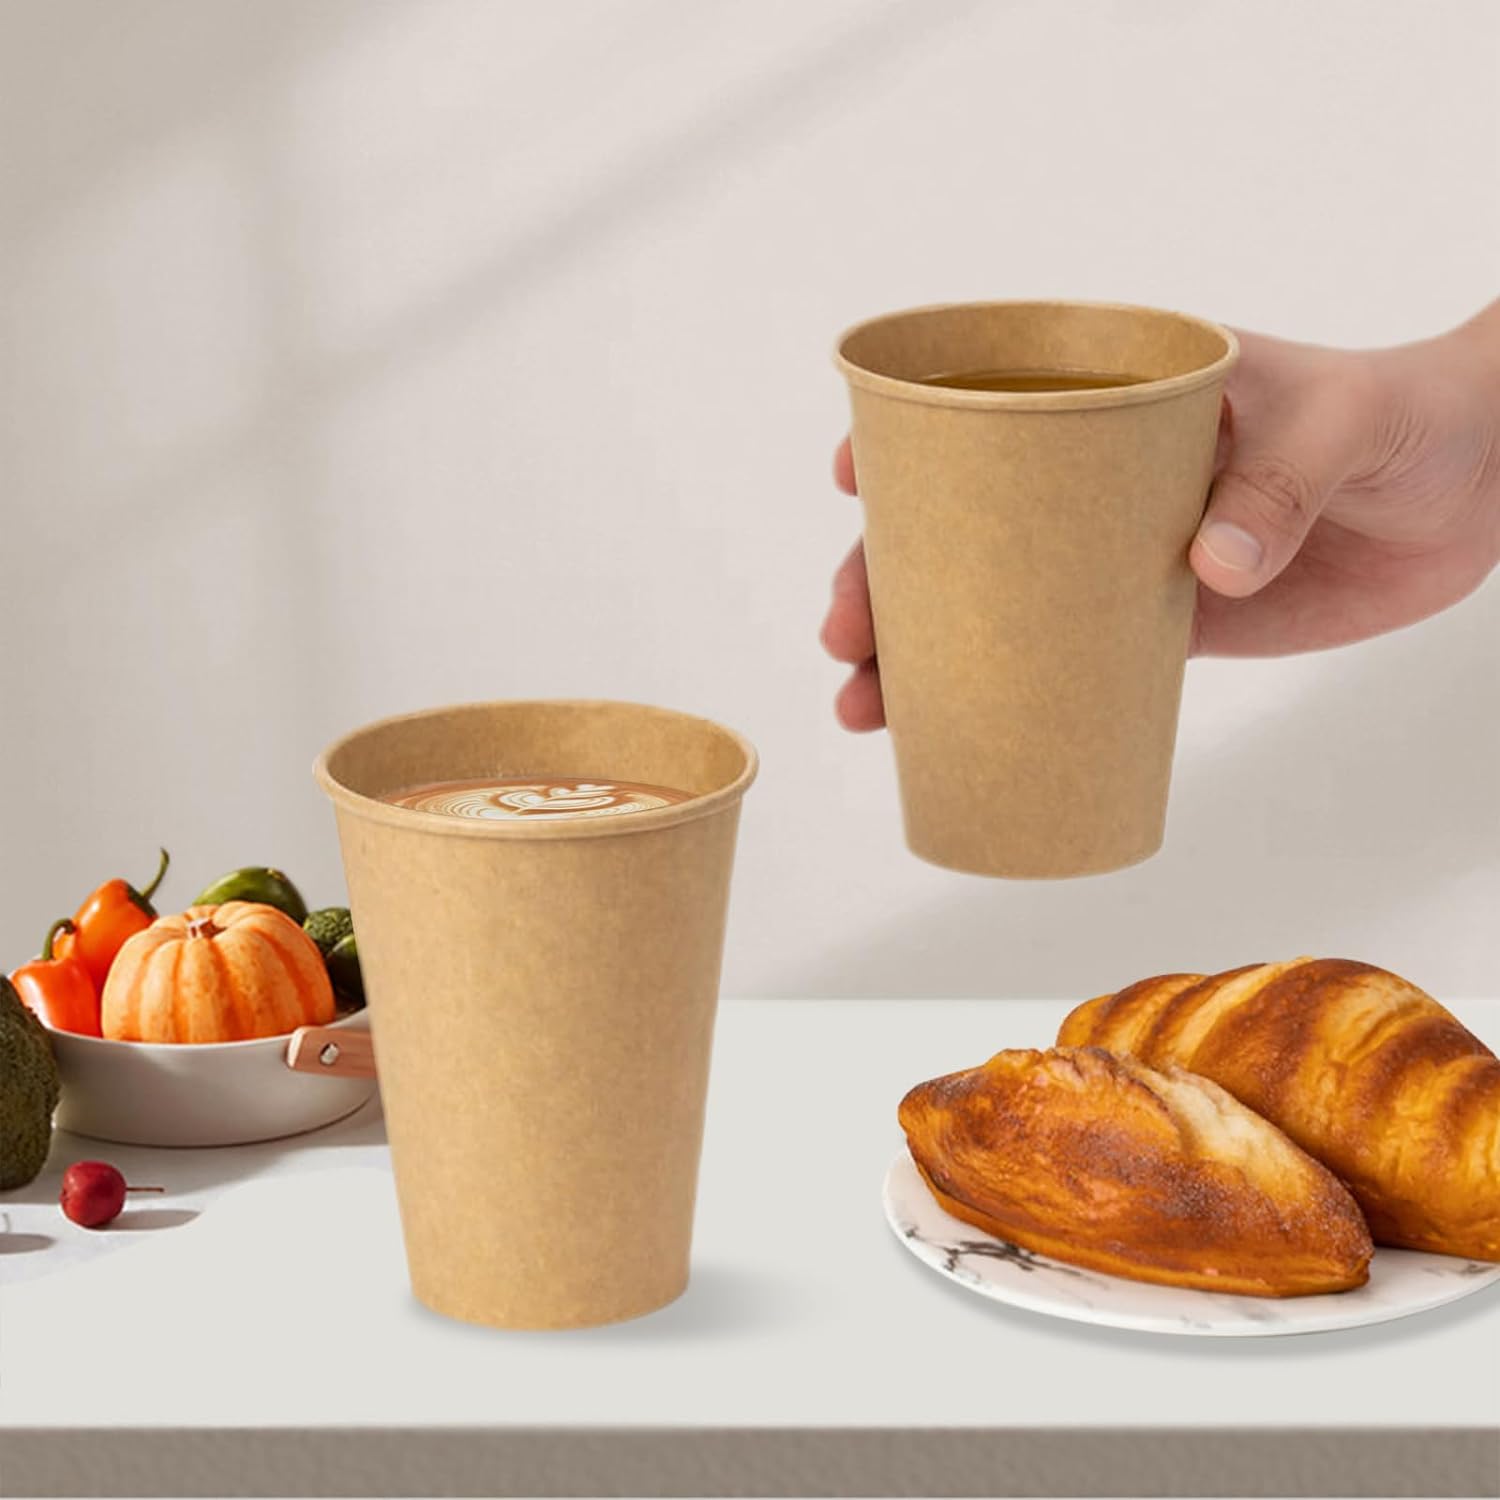 https://www.tuobopackaging.com/caffe-paper-cups/